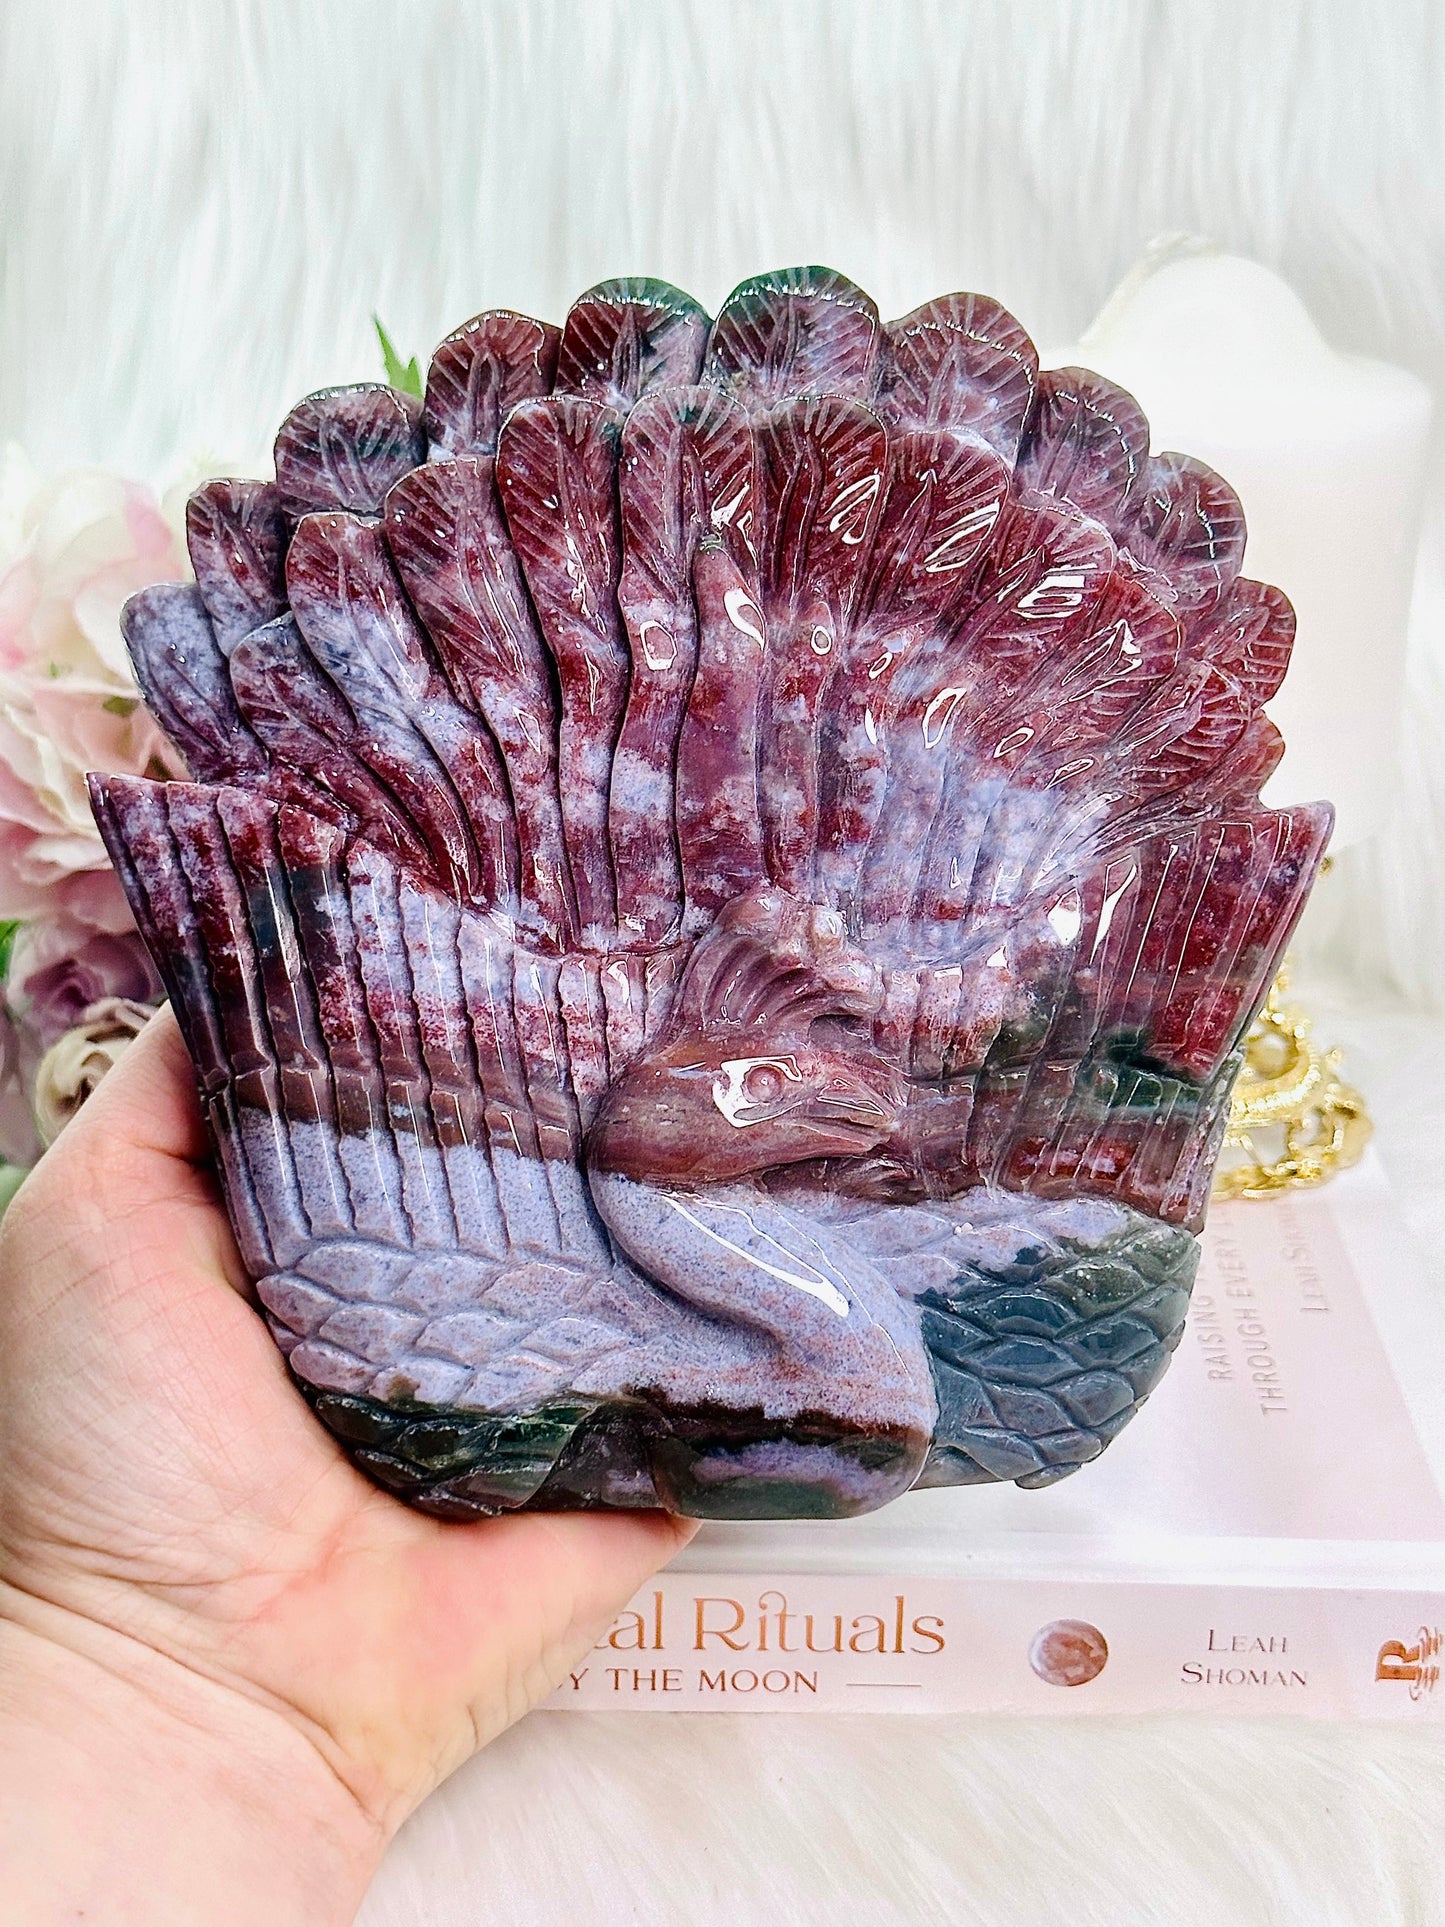 Positivity & Inspiration ~ Wow! Fabulous Huge 1.09KG 18cm Ocean Jasper Perfectly Carved Peacock